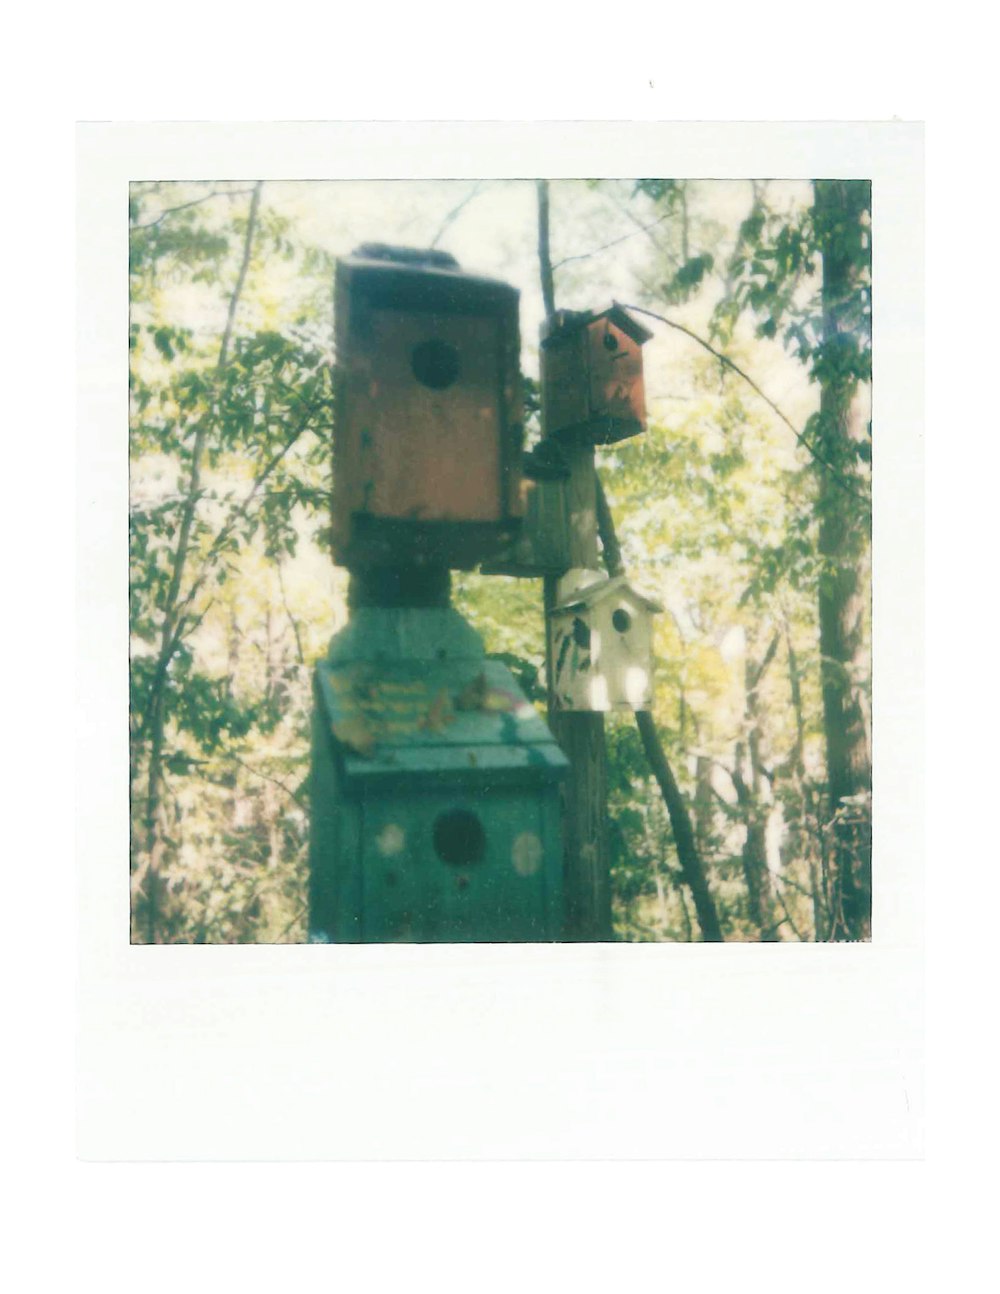 green and brown wooden birdhouse